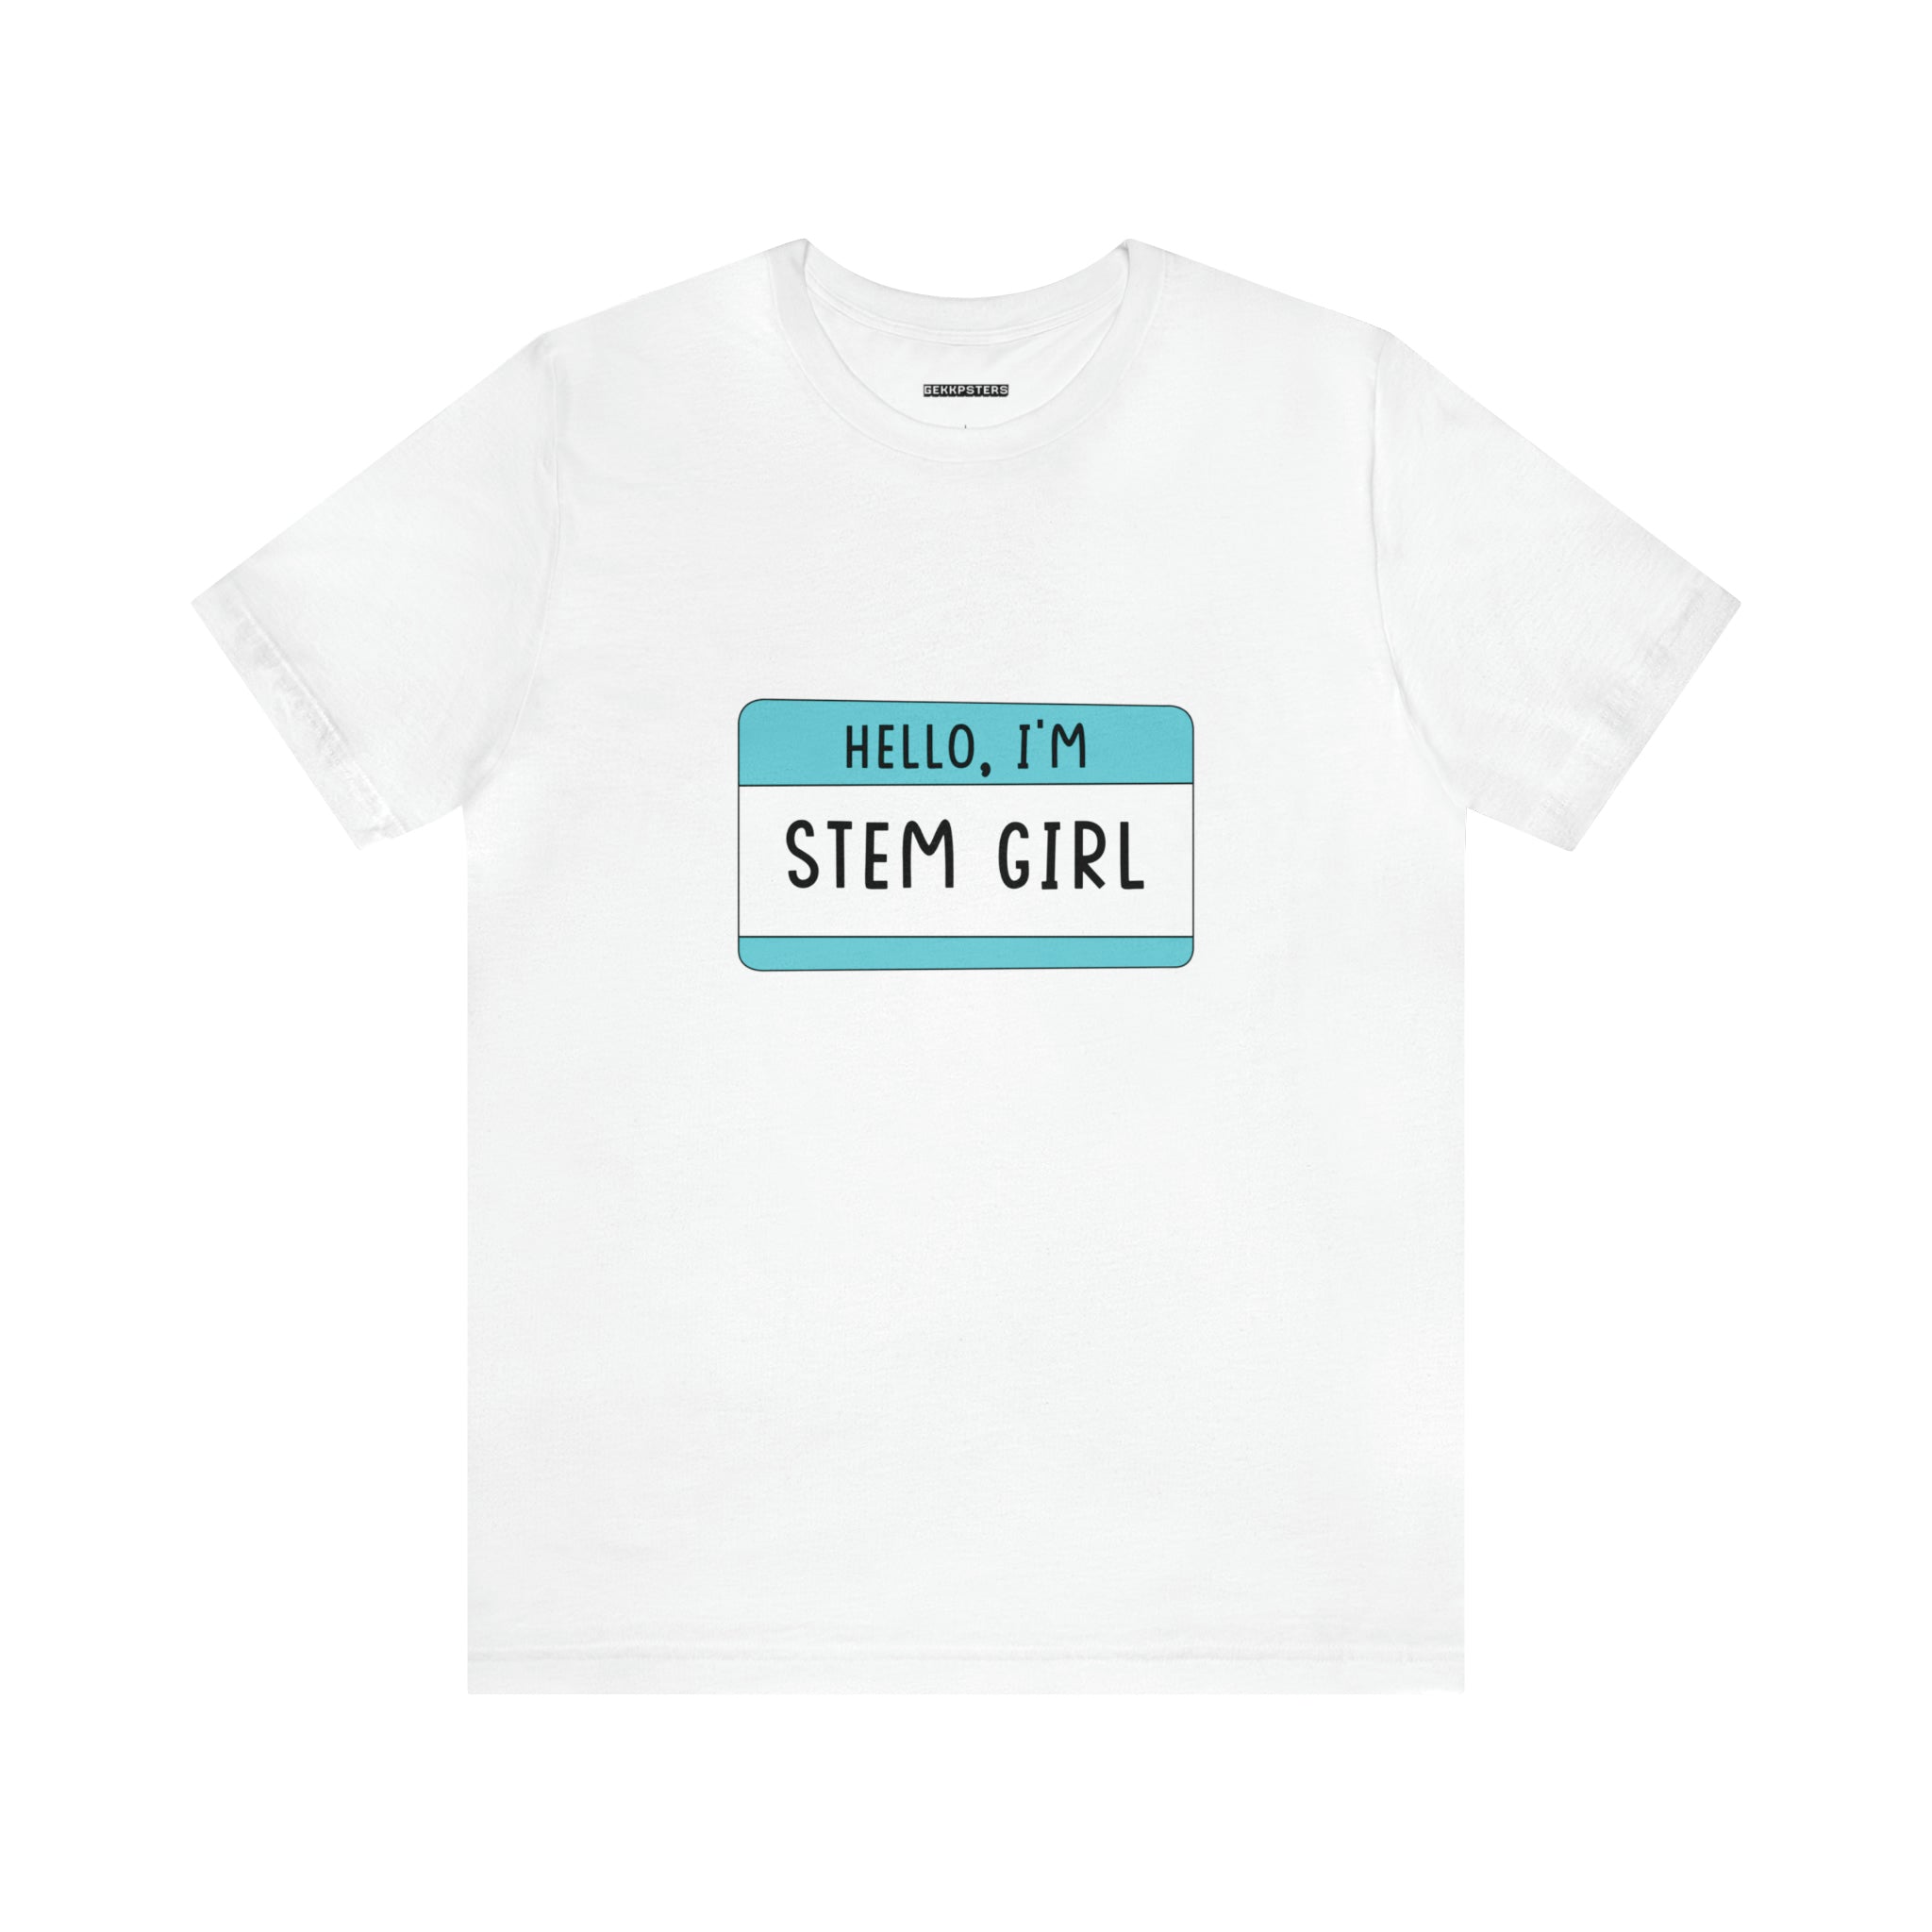 Hello, I'm Stem Girl T-Shirt with a blue name tag graphic reading "hello, I'm STEM Girl" on the chest area, designed to inspire curiosity among young minds.